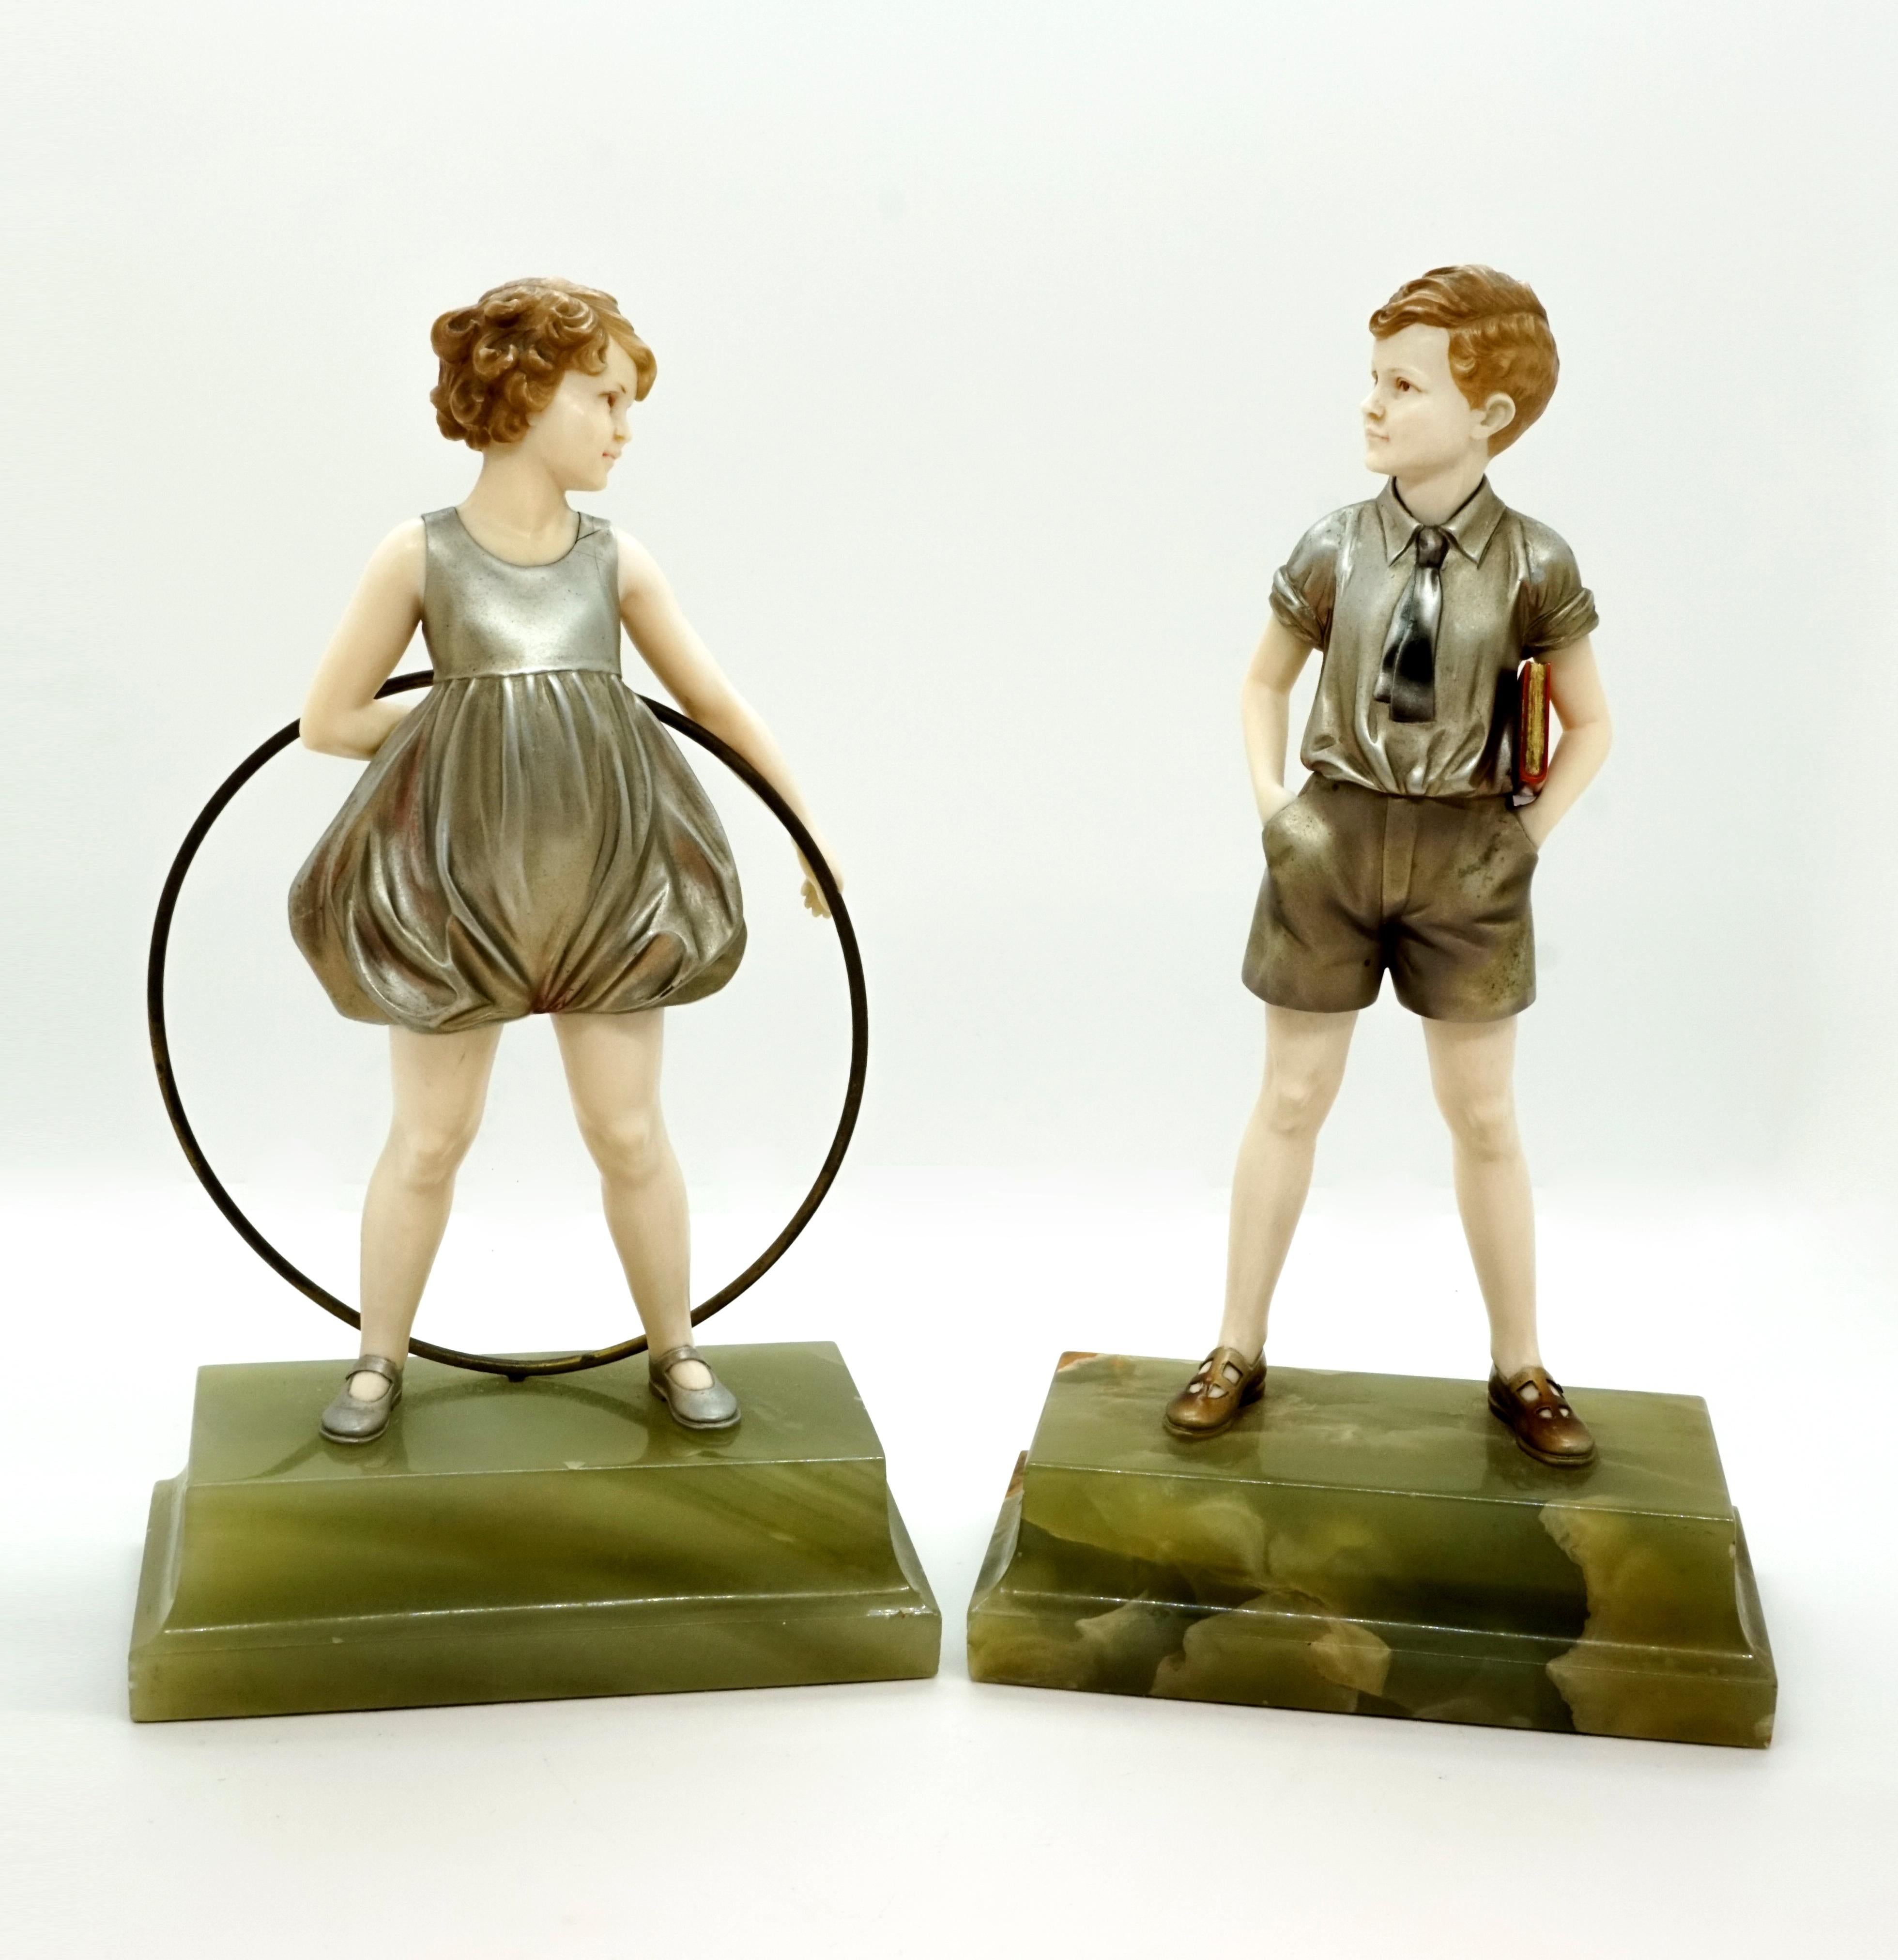 Two dainty, finely crafted children's figures:
Schoolboy with a book under his arm, his hands loosely tucked into his pockets and 
young girl in play jersey, holding a large hoop and stick behind her.
The bare body parts carved out of bone,